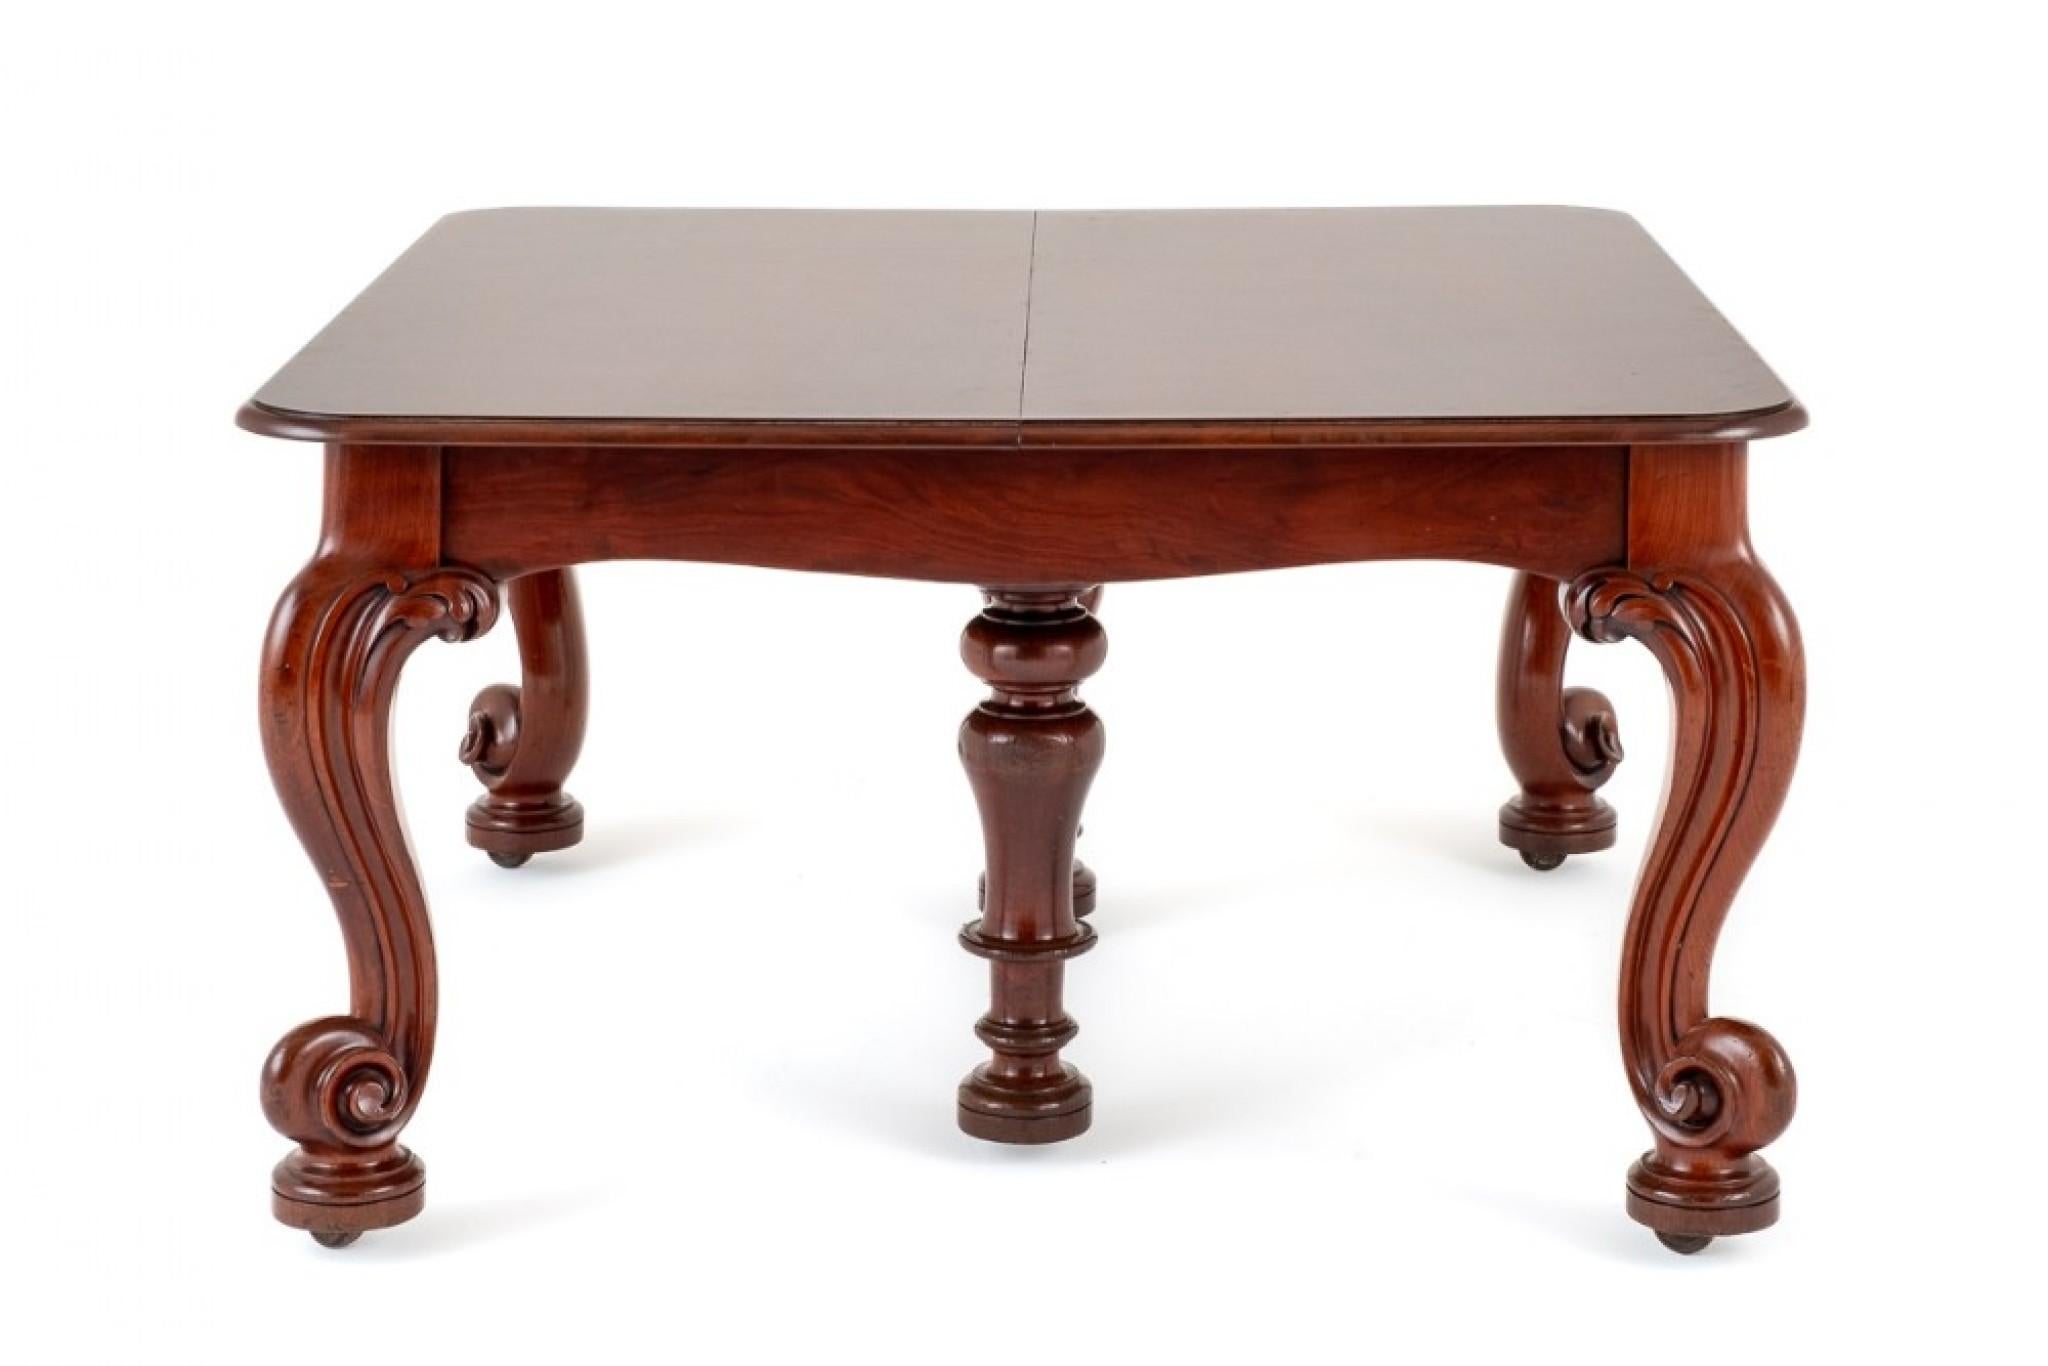 Mahogany Giant Victorian Dining Table Seats 24 by Samuel Hawkins 1860 For Sale